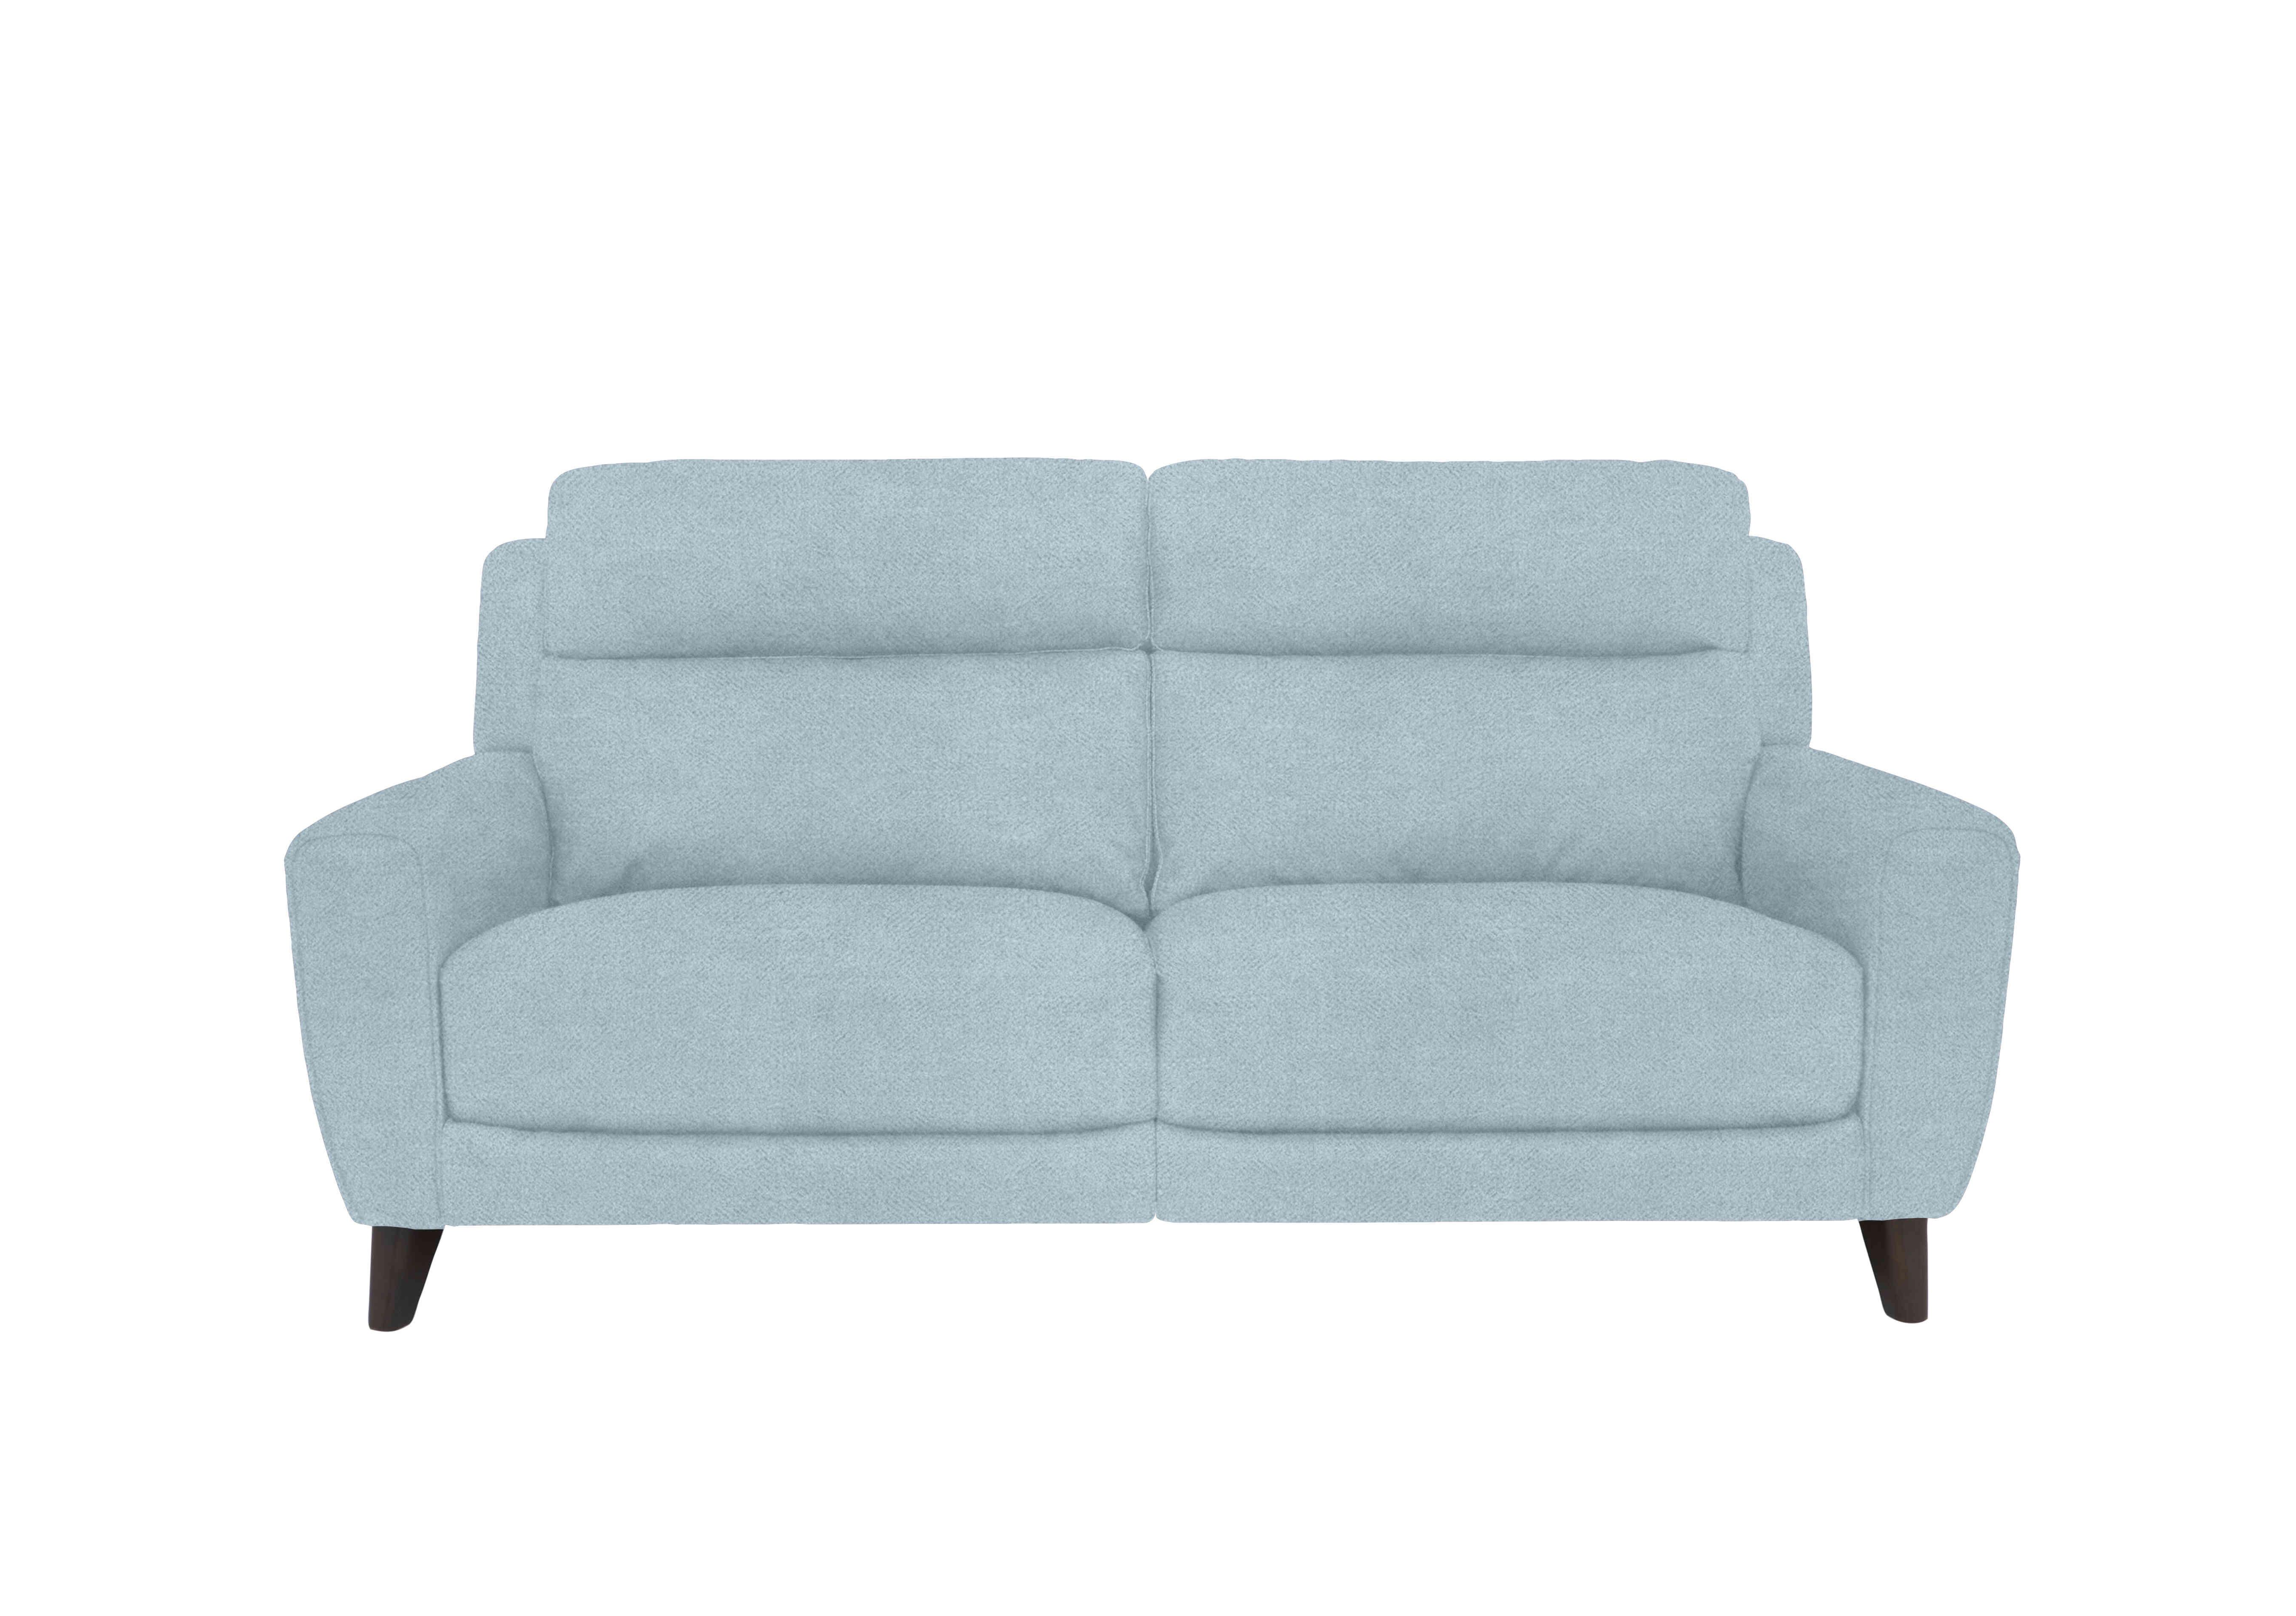 Zen 3 Seater Fabric Sofa in Fab-Meo-R17 Baby Blue on Furniture Village